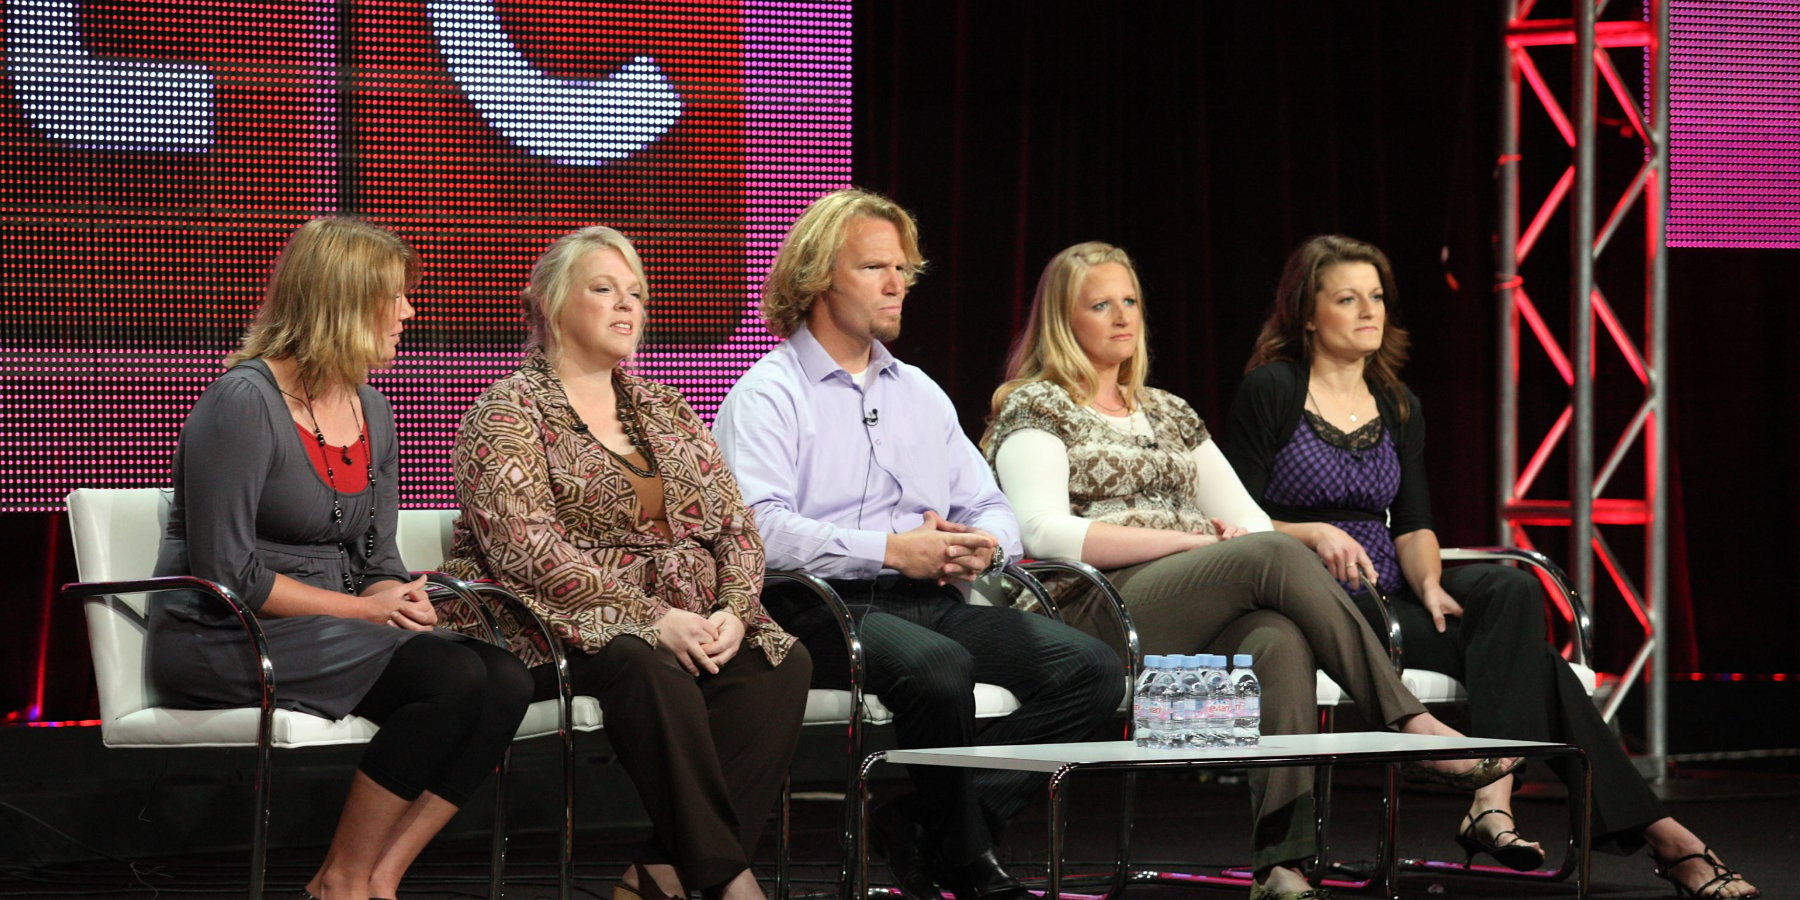 Meri, Janelle, Kody, Christine, and Robyn Brown on a TLC panel in 2010.